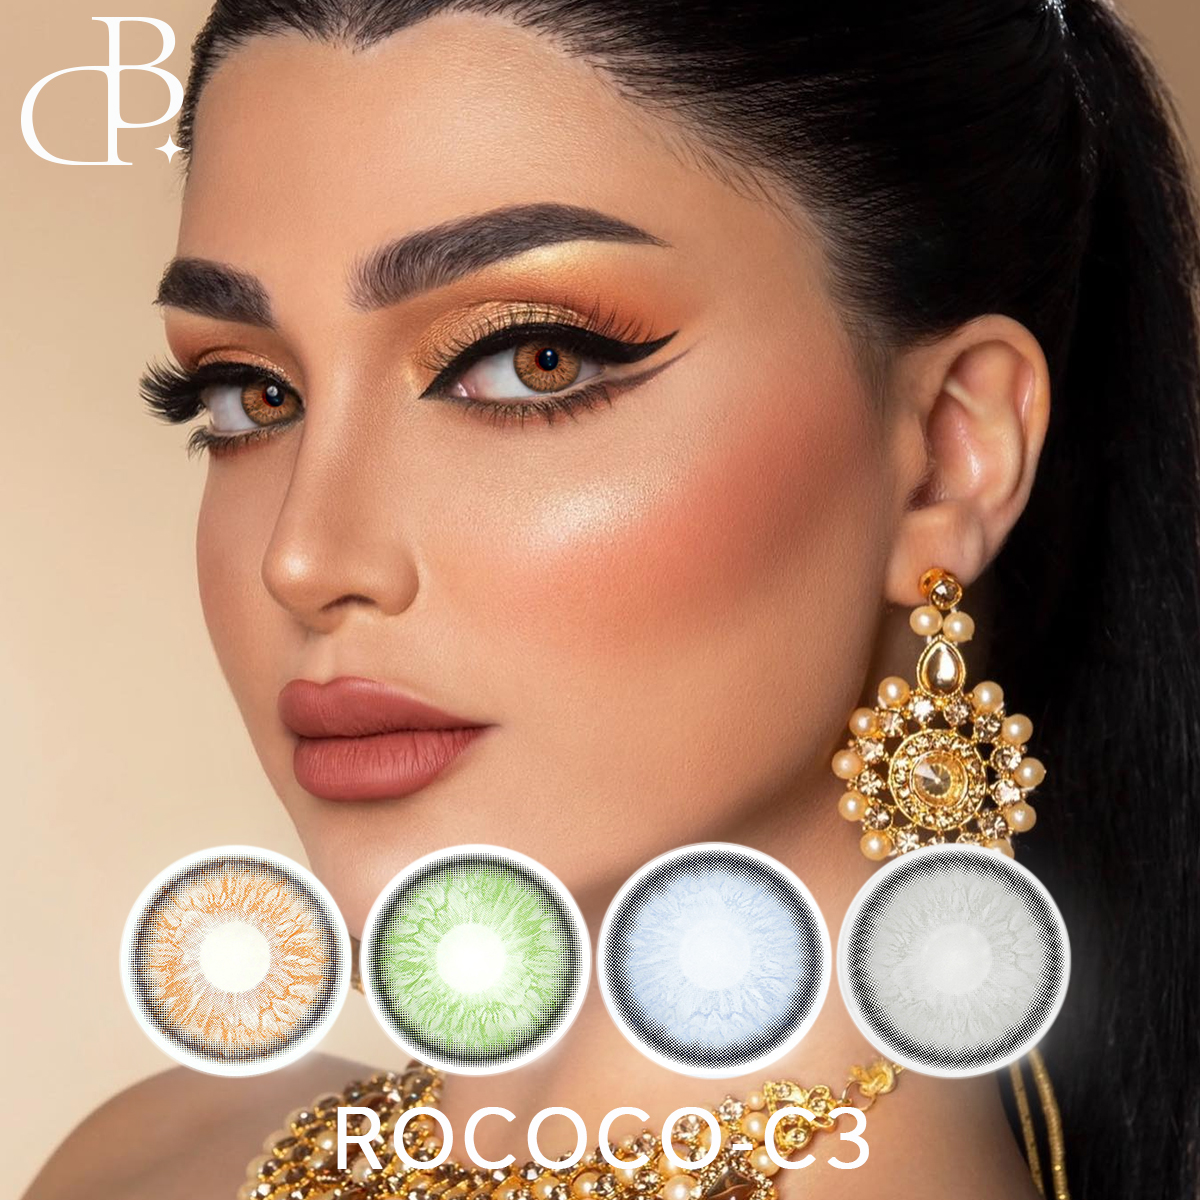 https://www.dbleenses.com/rococo-3-new-looking-cosmetic-wholesale-color-contact-lens-cheap-soft-yearly-eye-colored-contact-lenses-product/